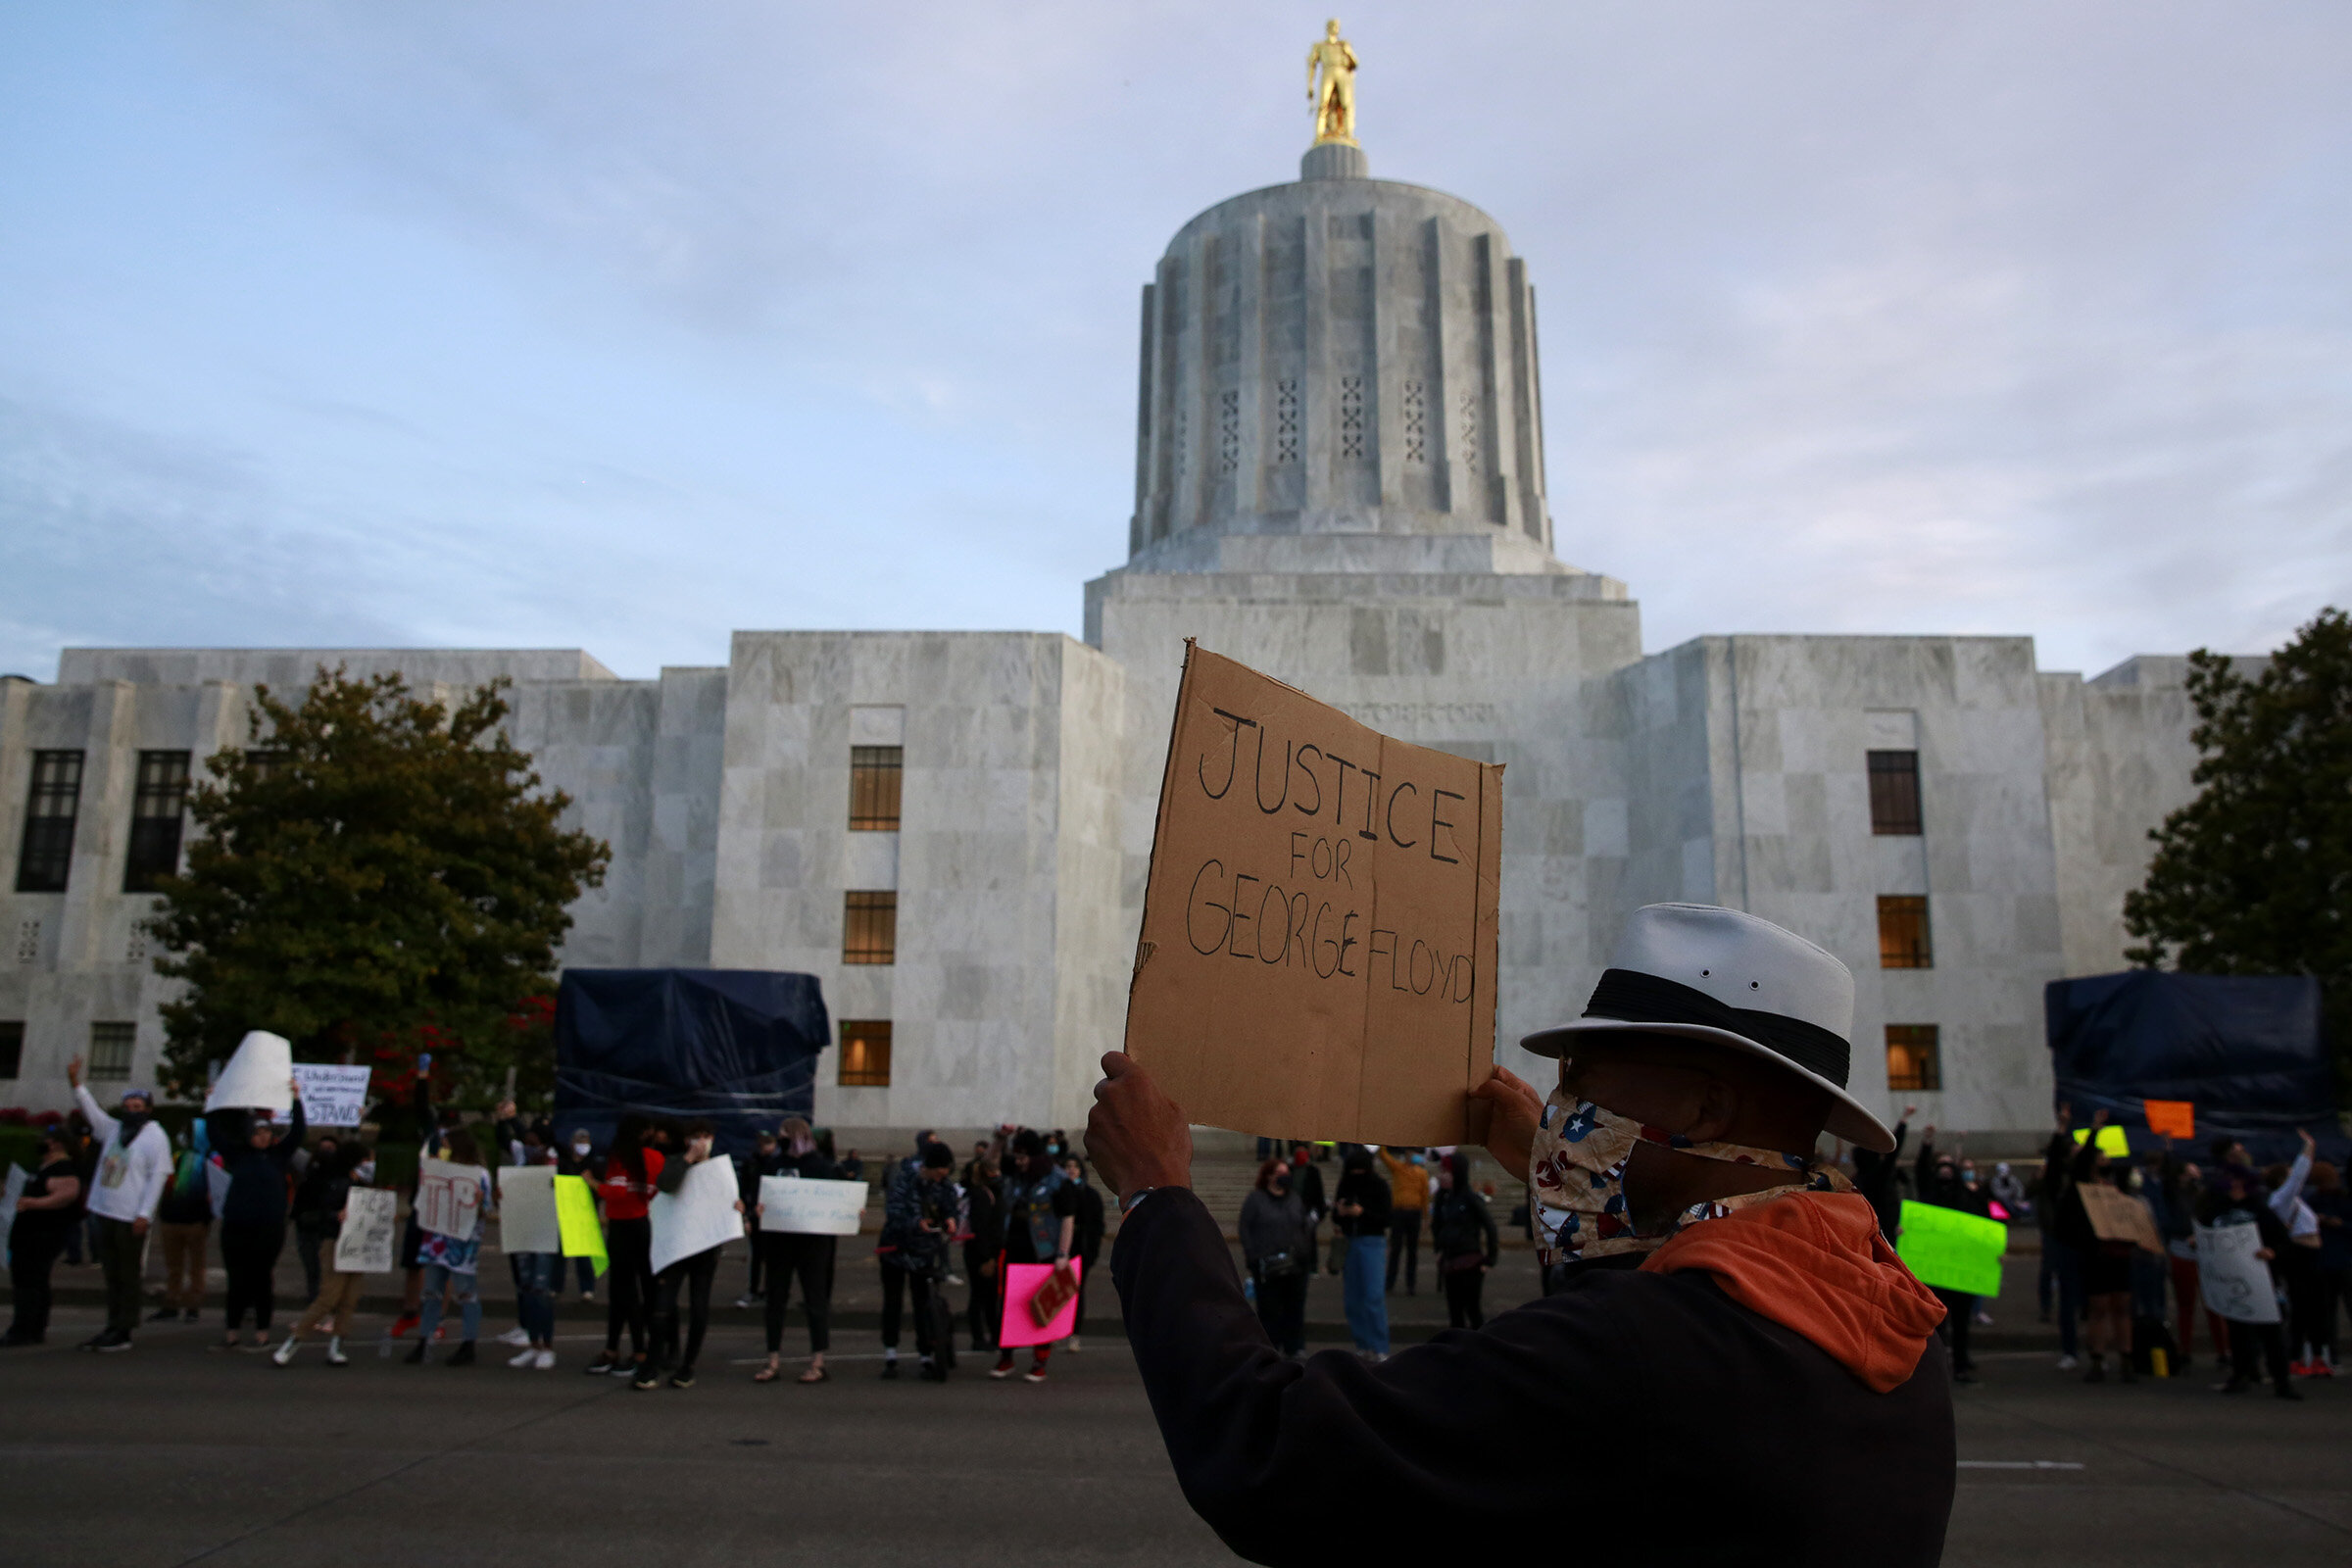  Donga de Abeokuta of Salem holds a sign reading “Justice for George Floyd” while participating in a protest of Floyd’d death outside the Oregon State Capitol Building in Salem, Oregon, on Sunday, May 31, 2020. 